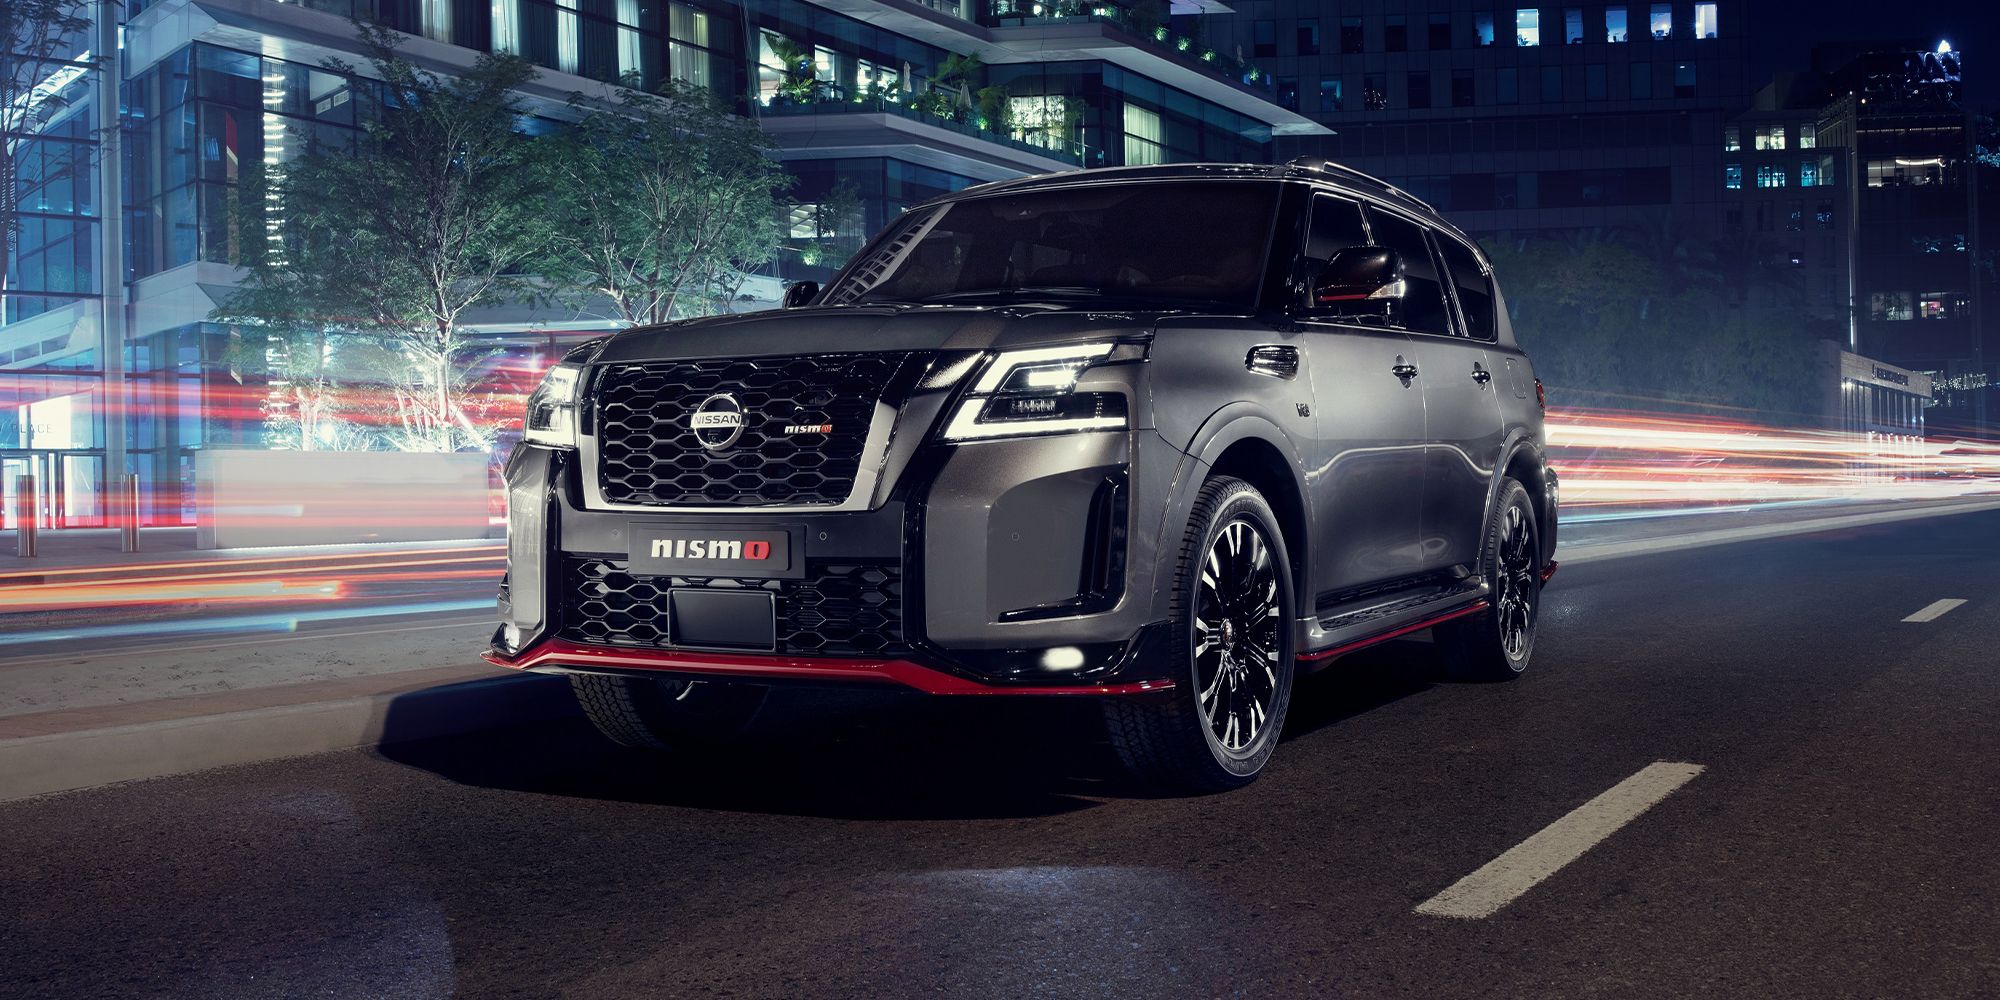 The front of the new Patrol Nismo